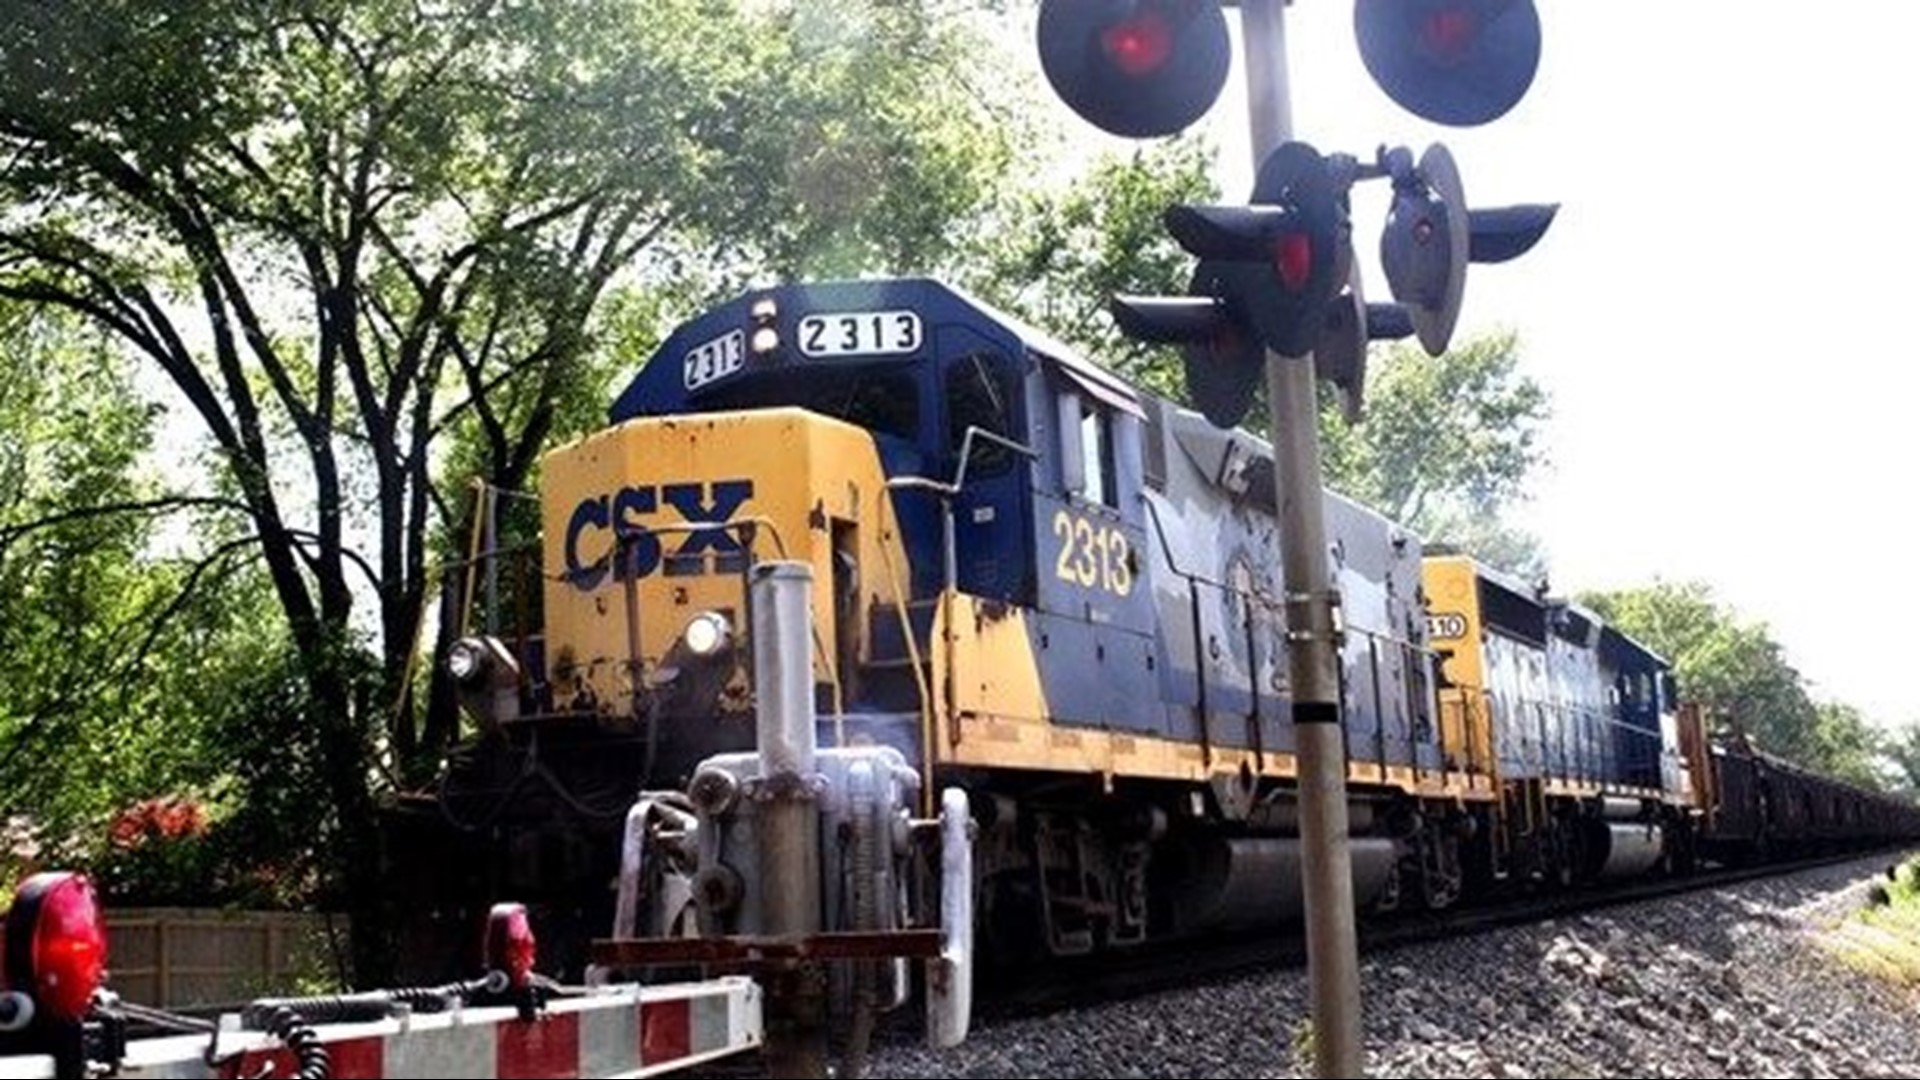 The legislation was introduced on Wednesday, many residents shared their own stories about how the trains are blocking roads, causing trouble.